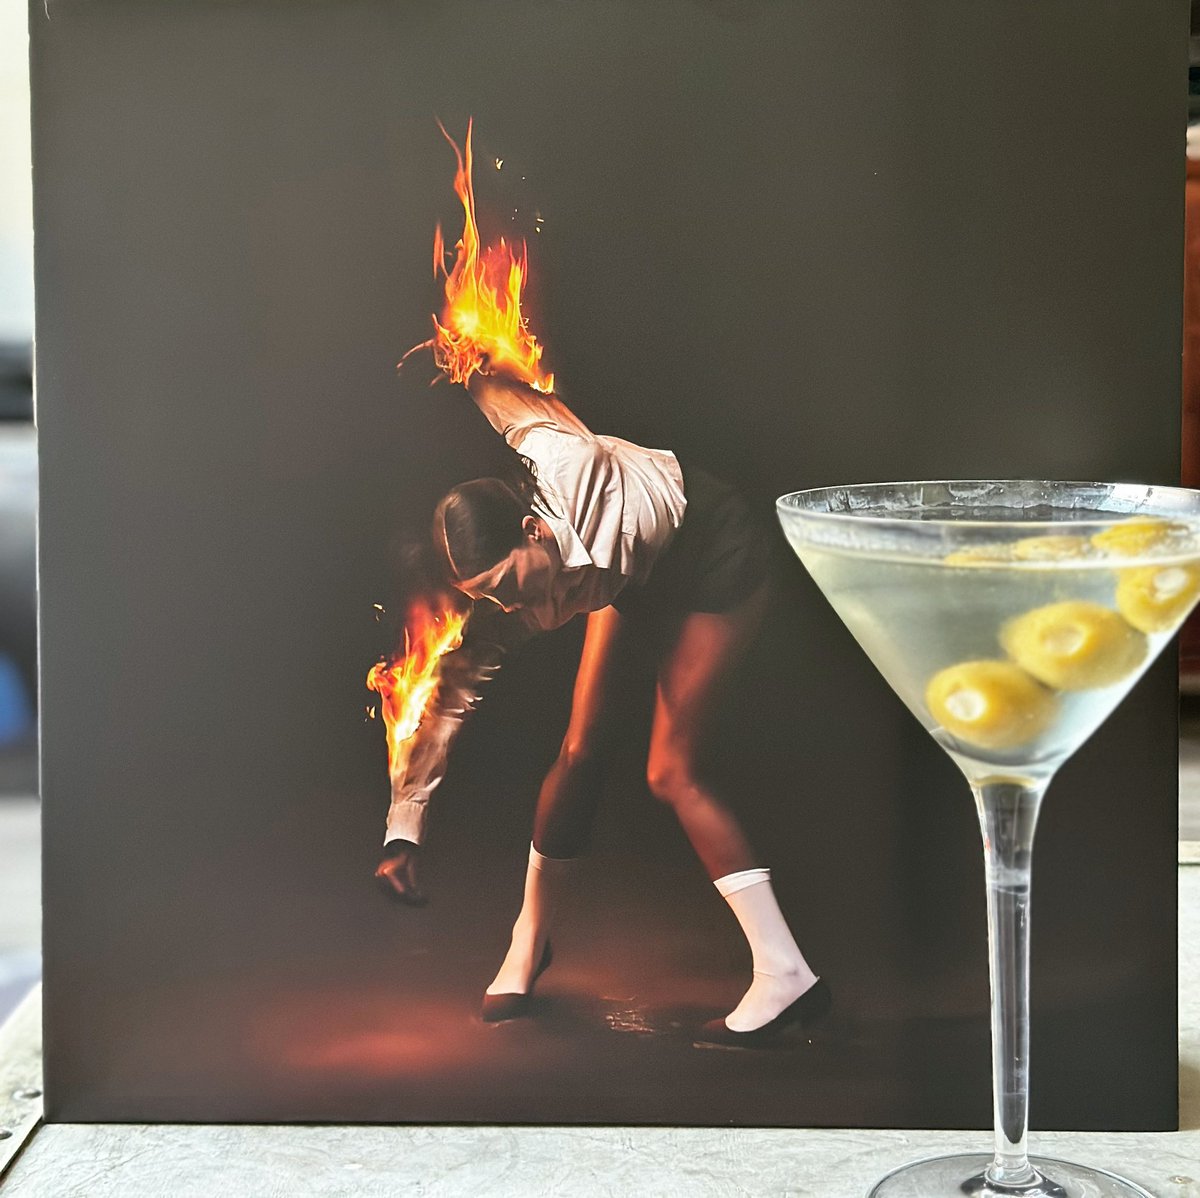 I finally got my exclusive white vinyl pressing of #AllBornScreaming from @RoughTrade. I’m under @st_vincent’s sonic spell once again. 🔥🍸 #MartiniAndMusic